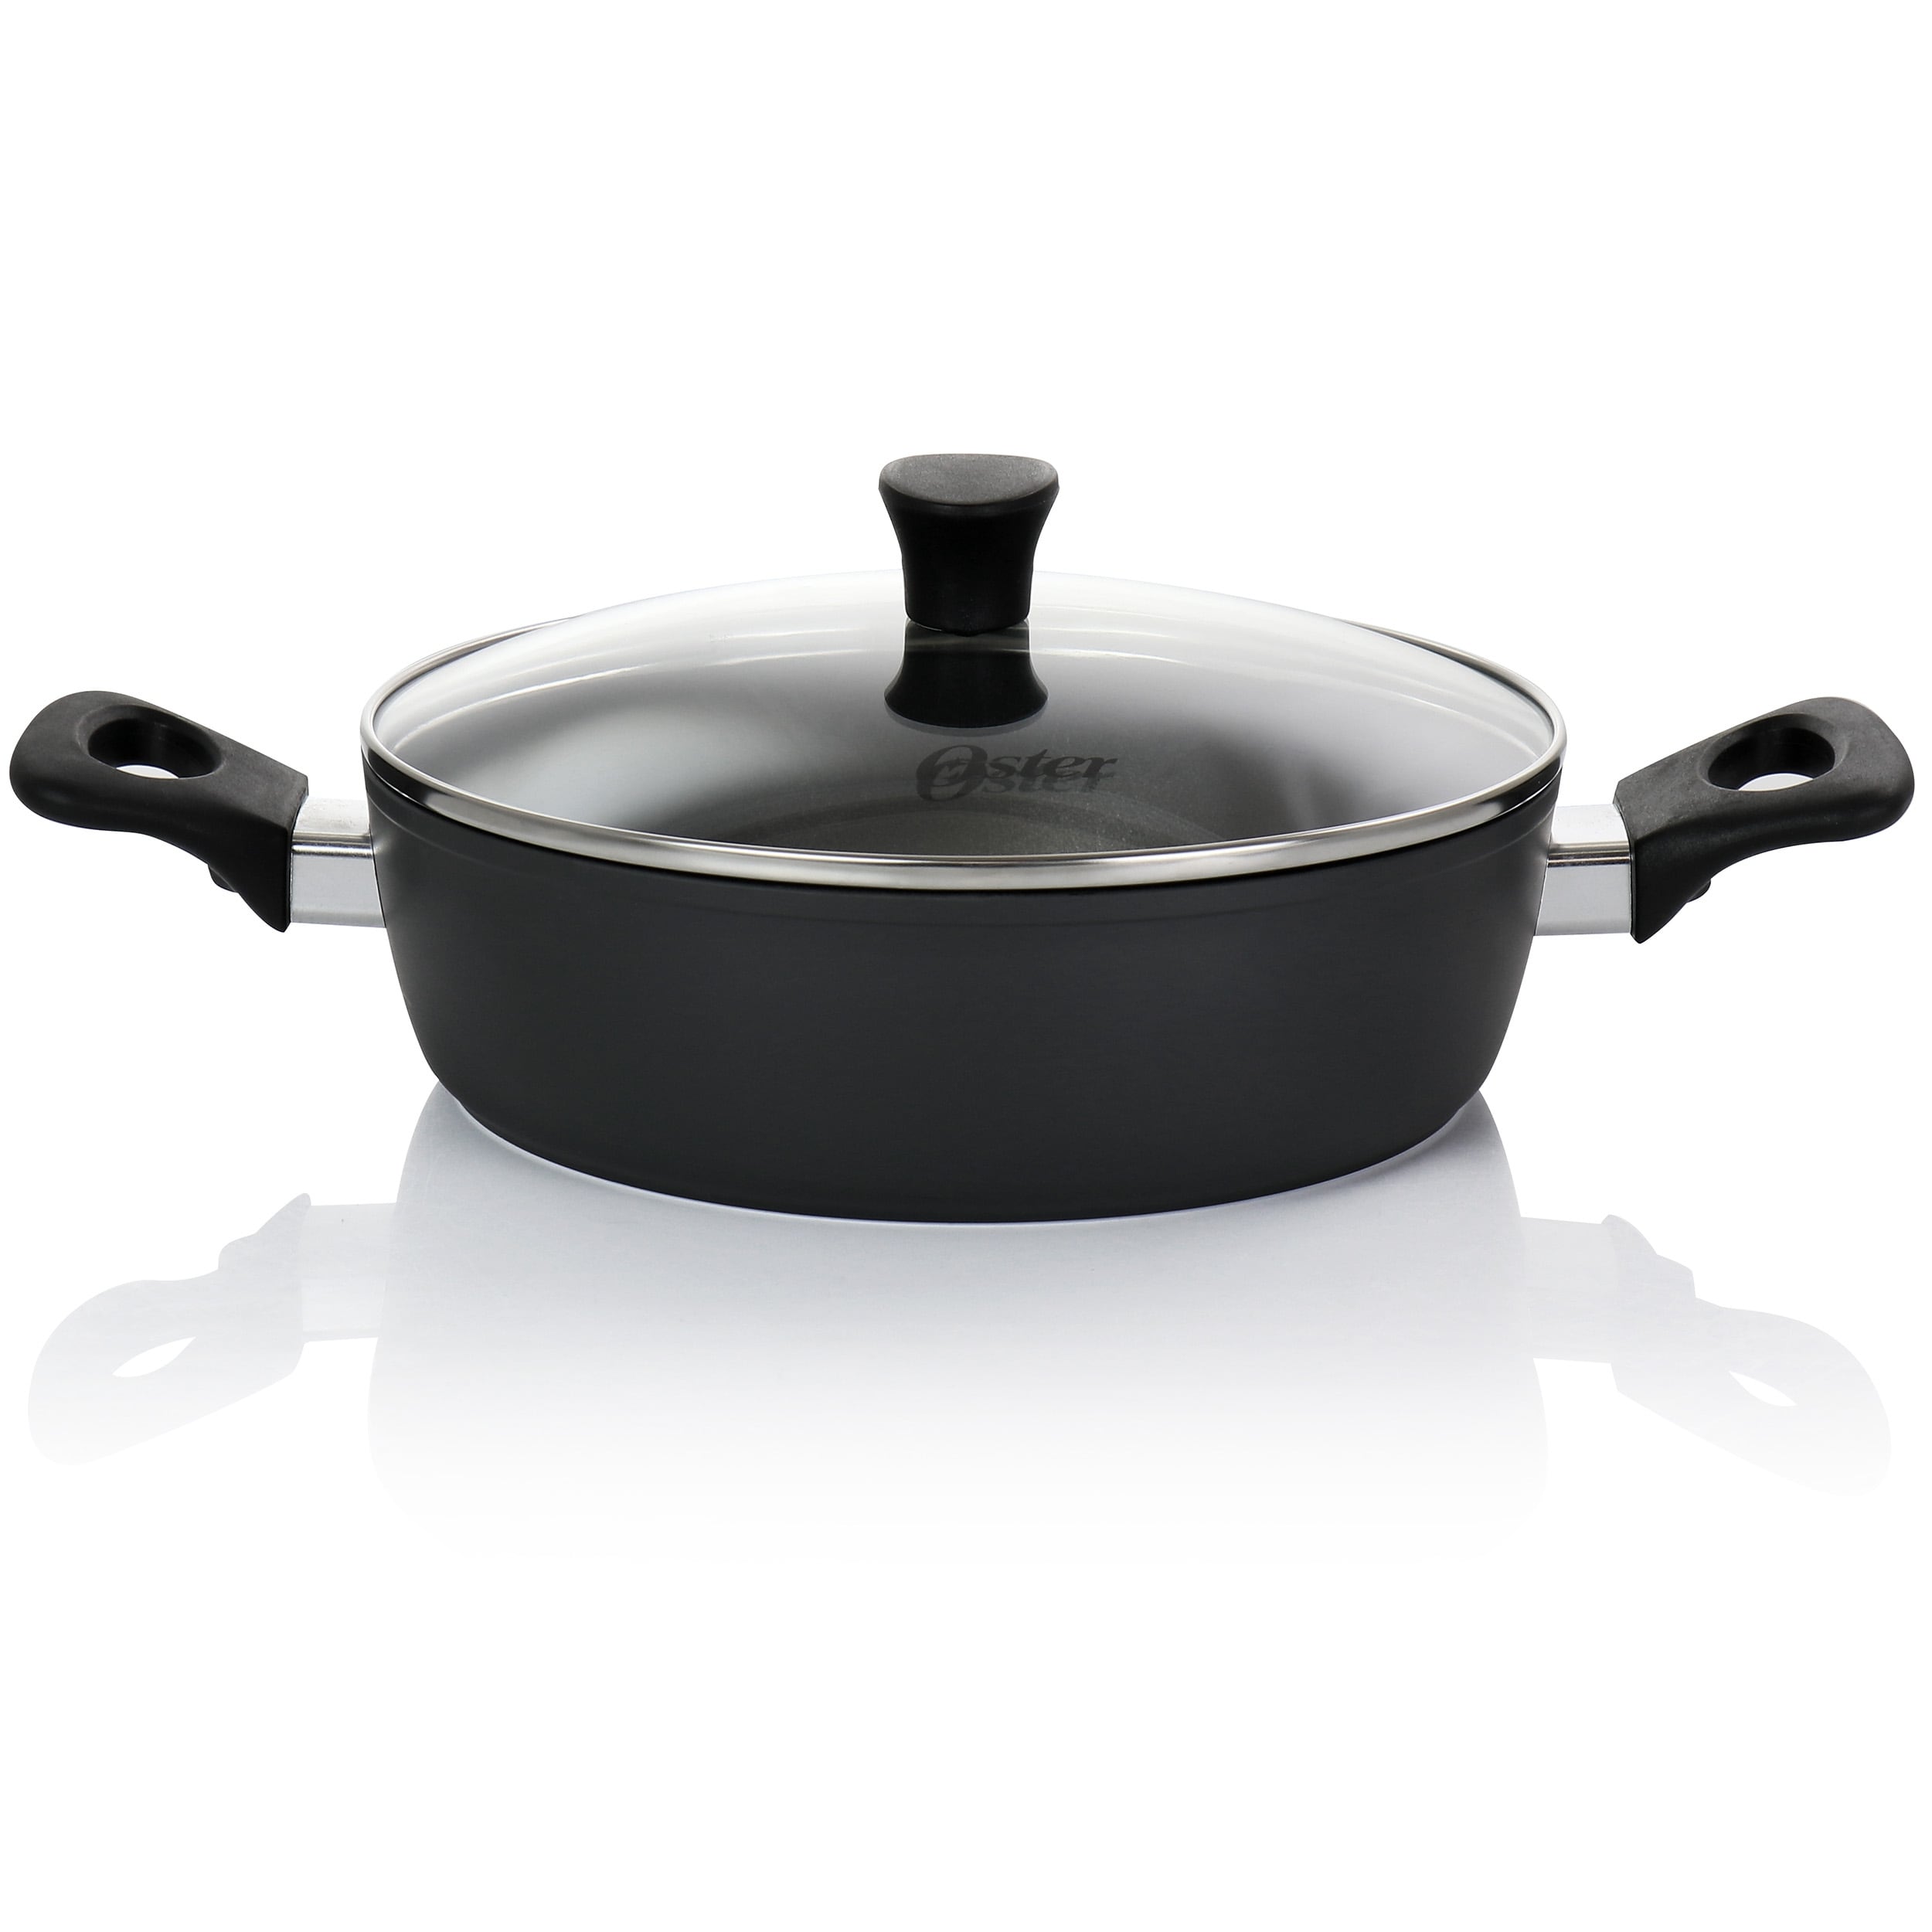 https://ak1.ostkcdn.com/images/products/is/images/direct/41853c3836888375214381d4bc07ae0fa4109714/Oster-3-Quart-Non-Stick-Aluminum-Everyday-Pan-with-Lid.jpg